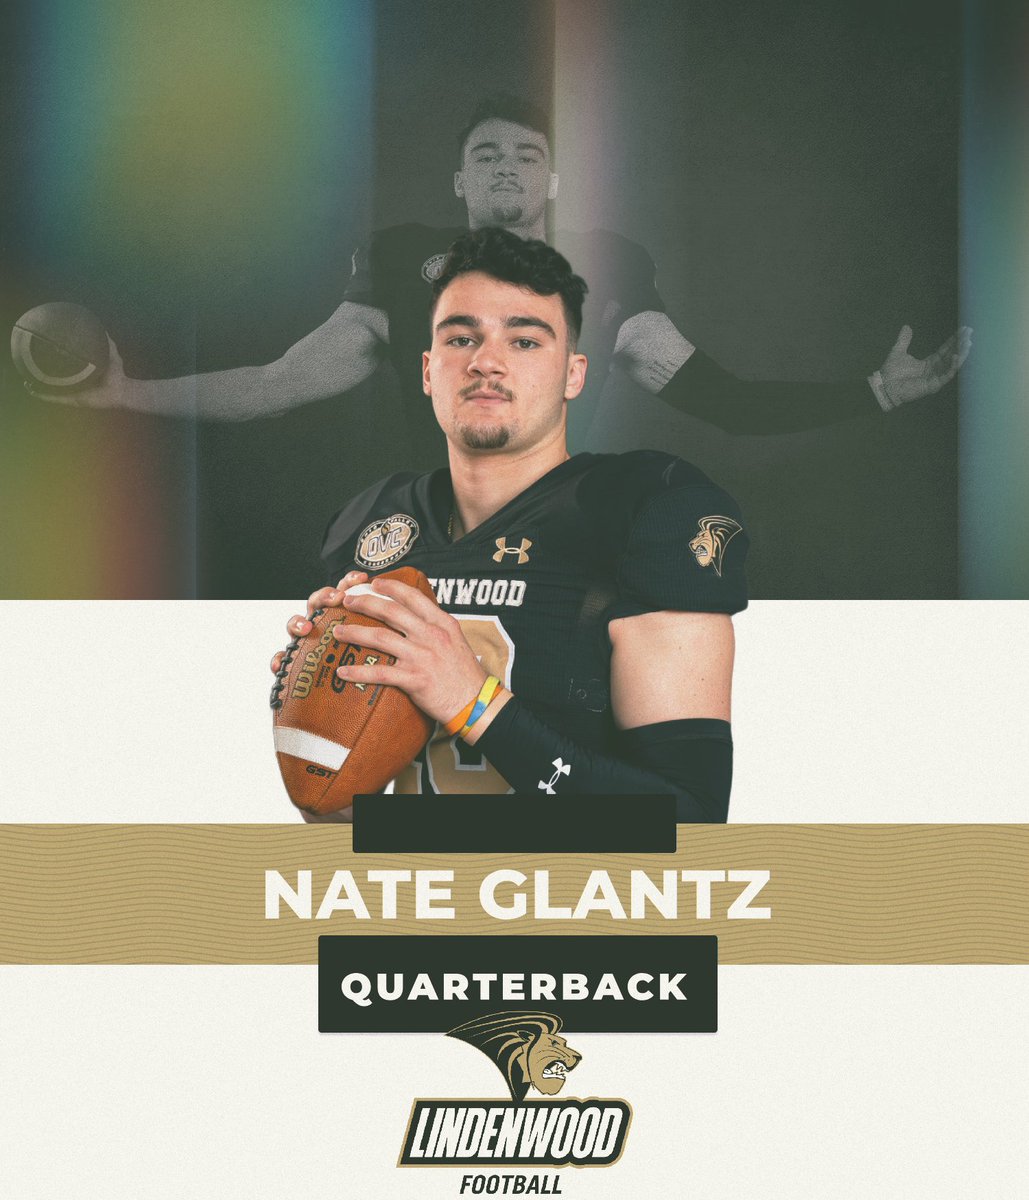 National Player of the Year, Offensive Player of the Year, All-American, All-Conference, Team Captain Welcome Home, @nglantz18